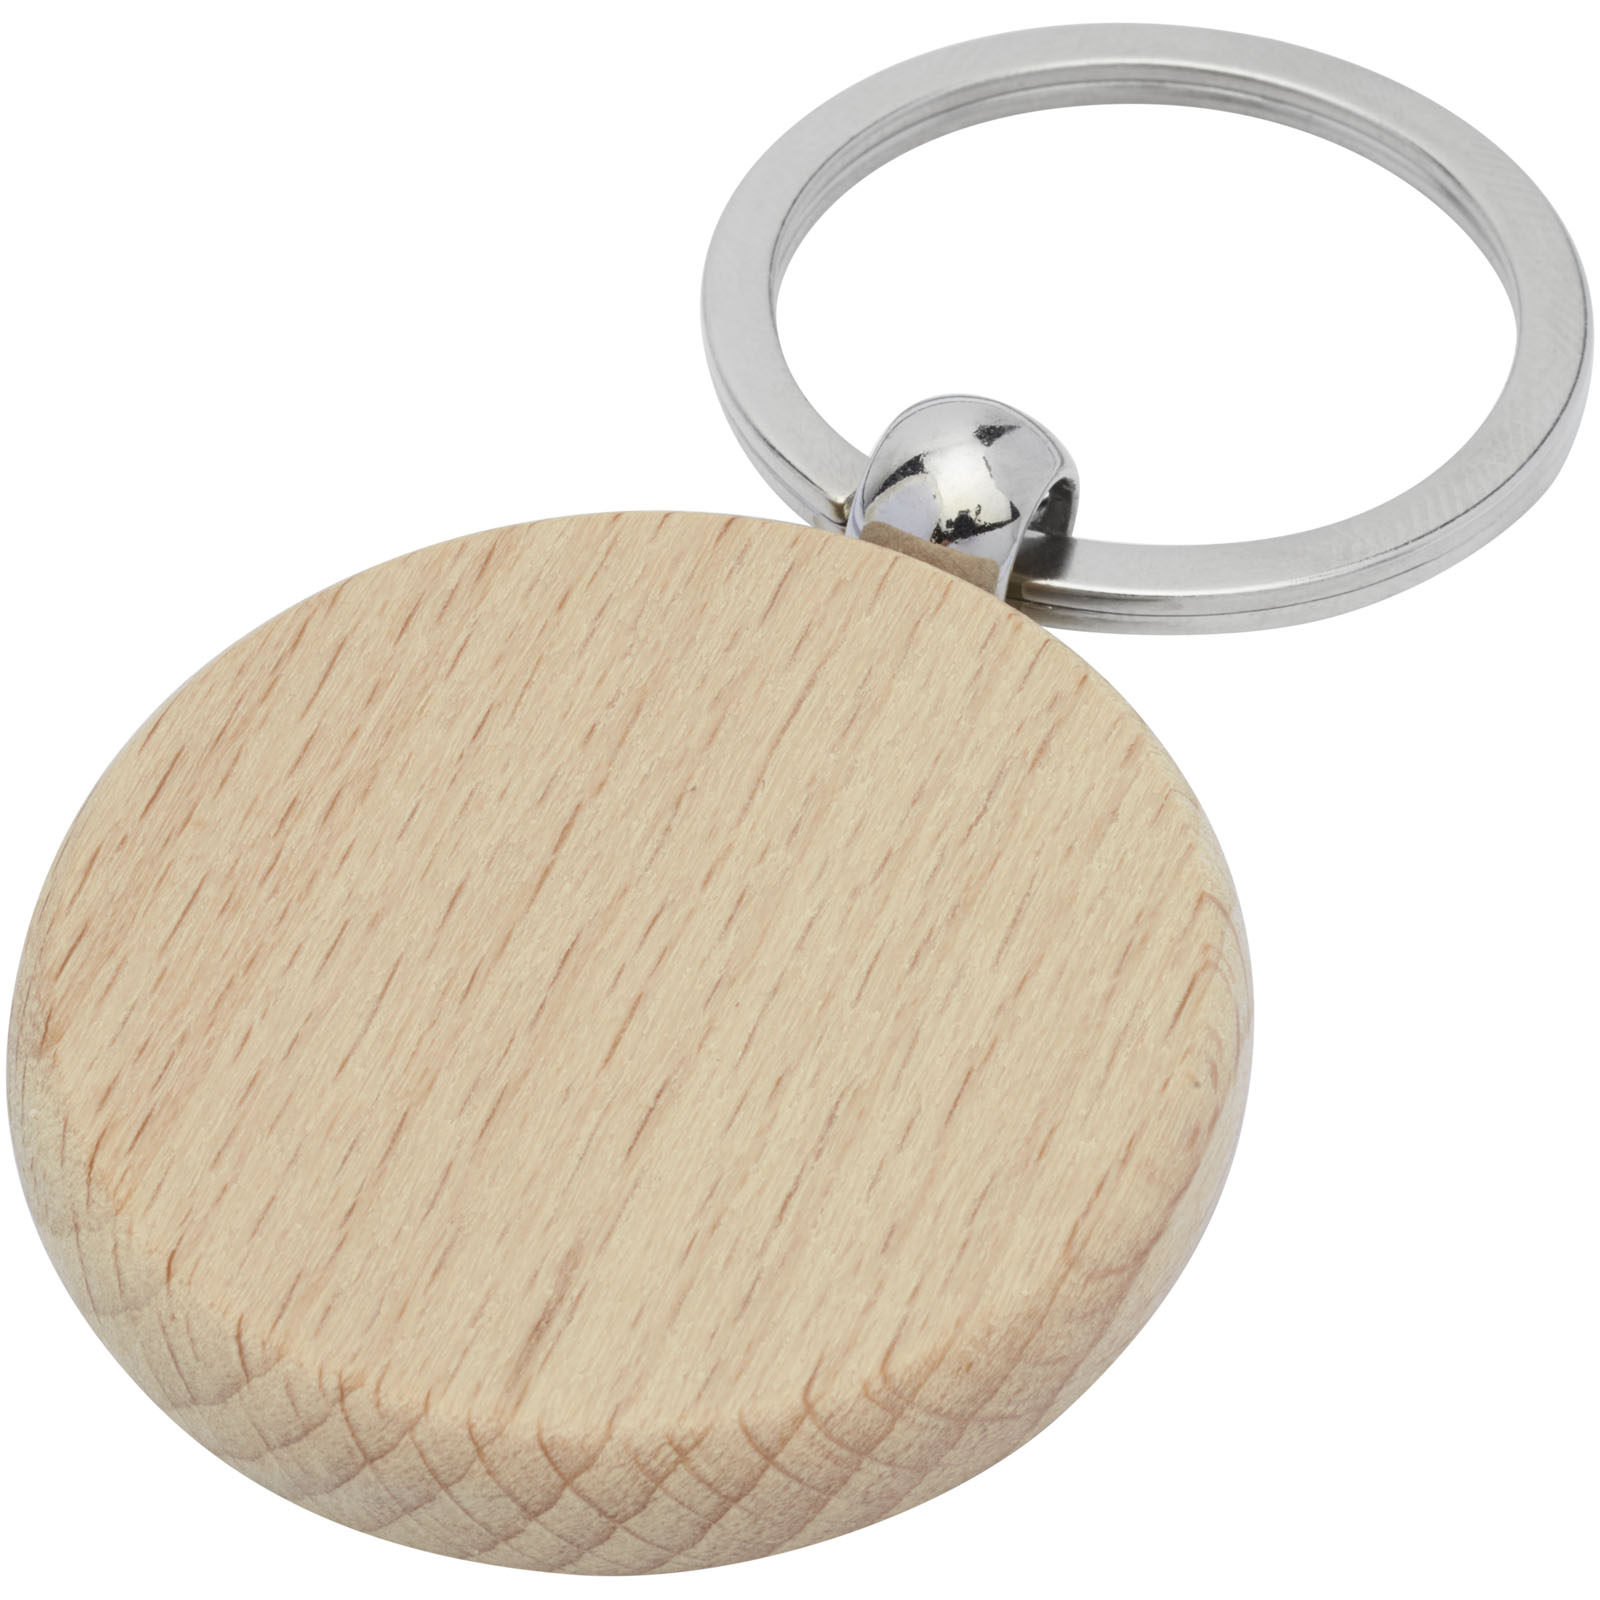 Advertising Keychains & Keyrings - Giovanni beech wood round keychain - 0